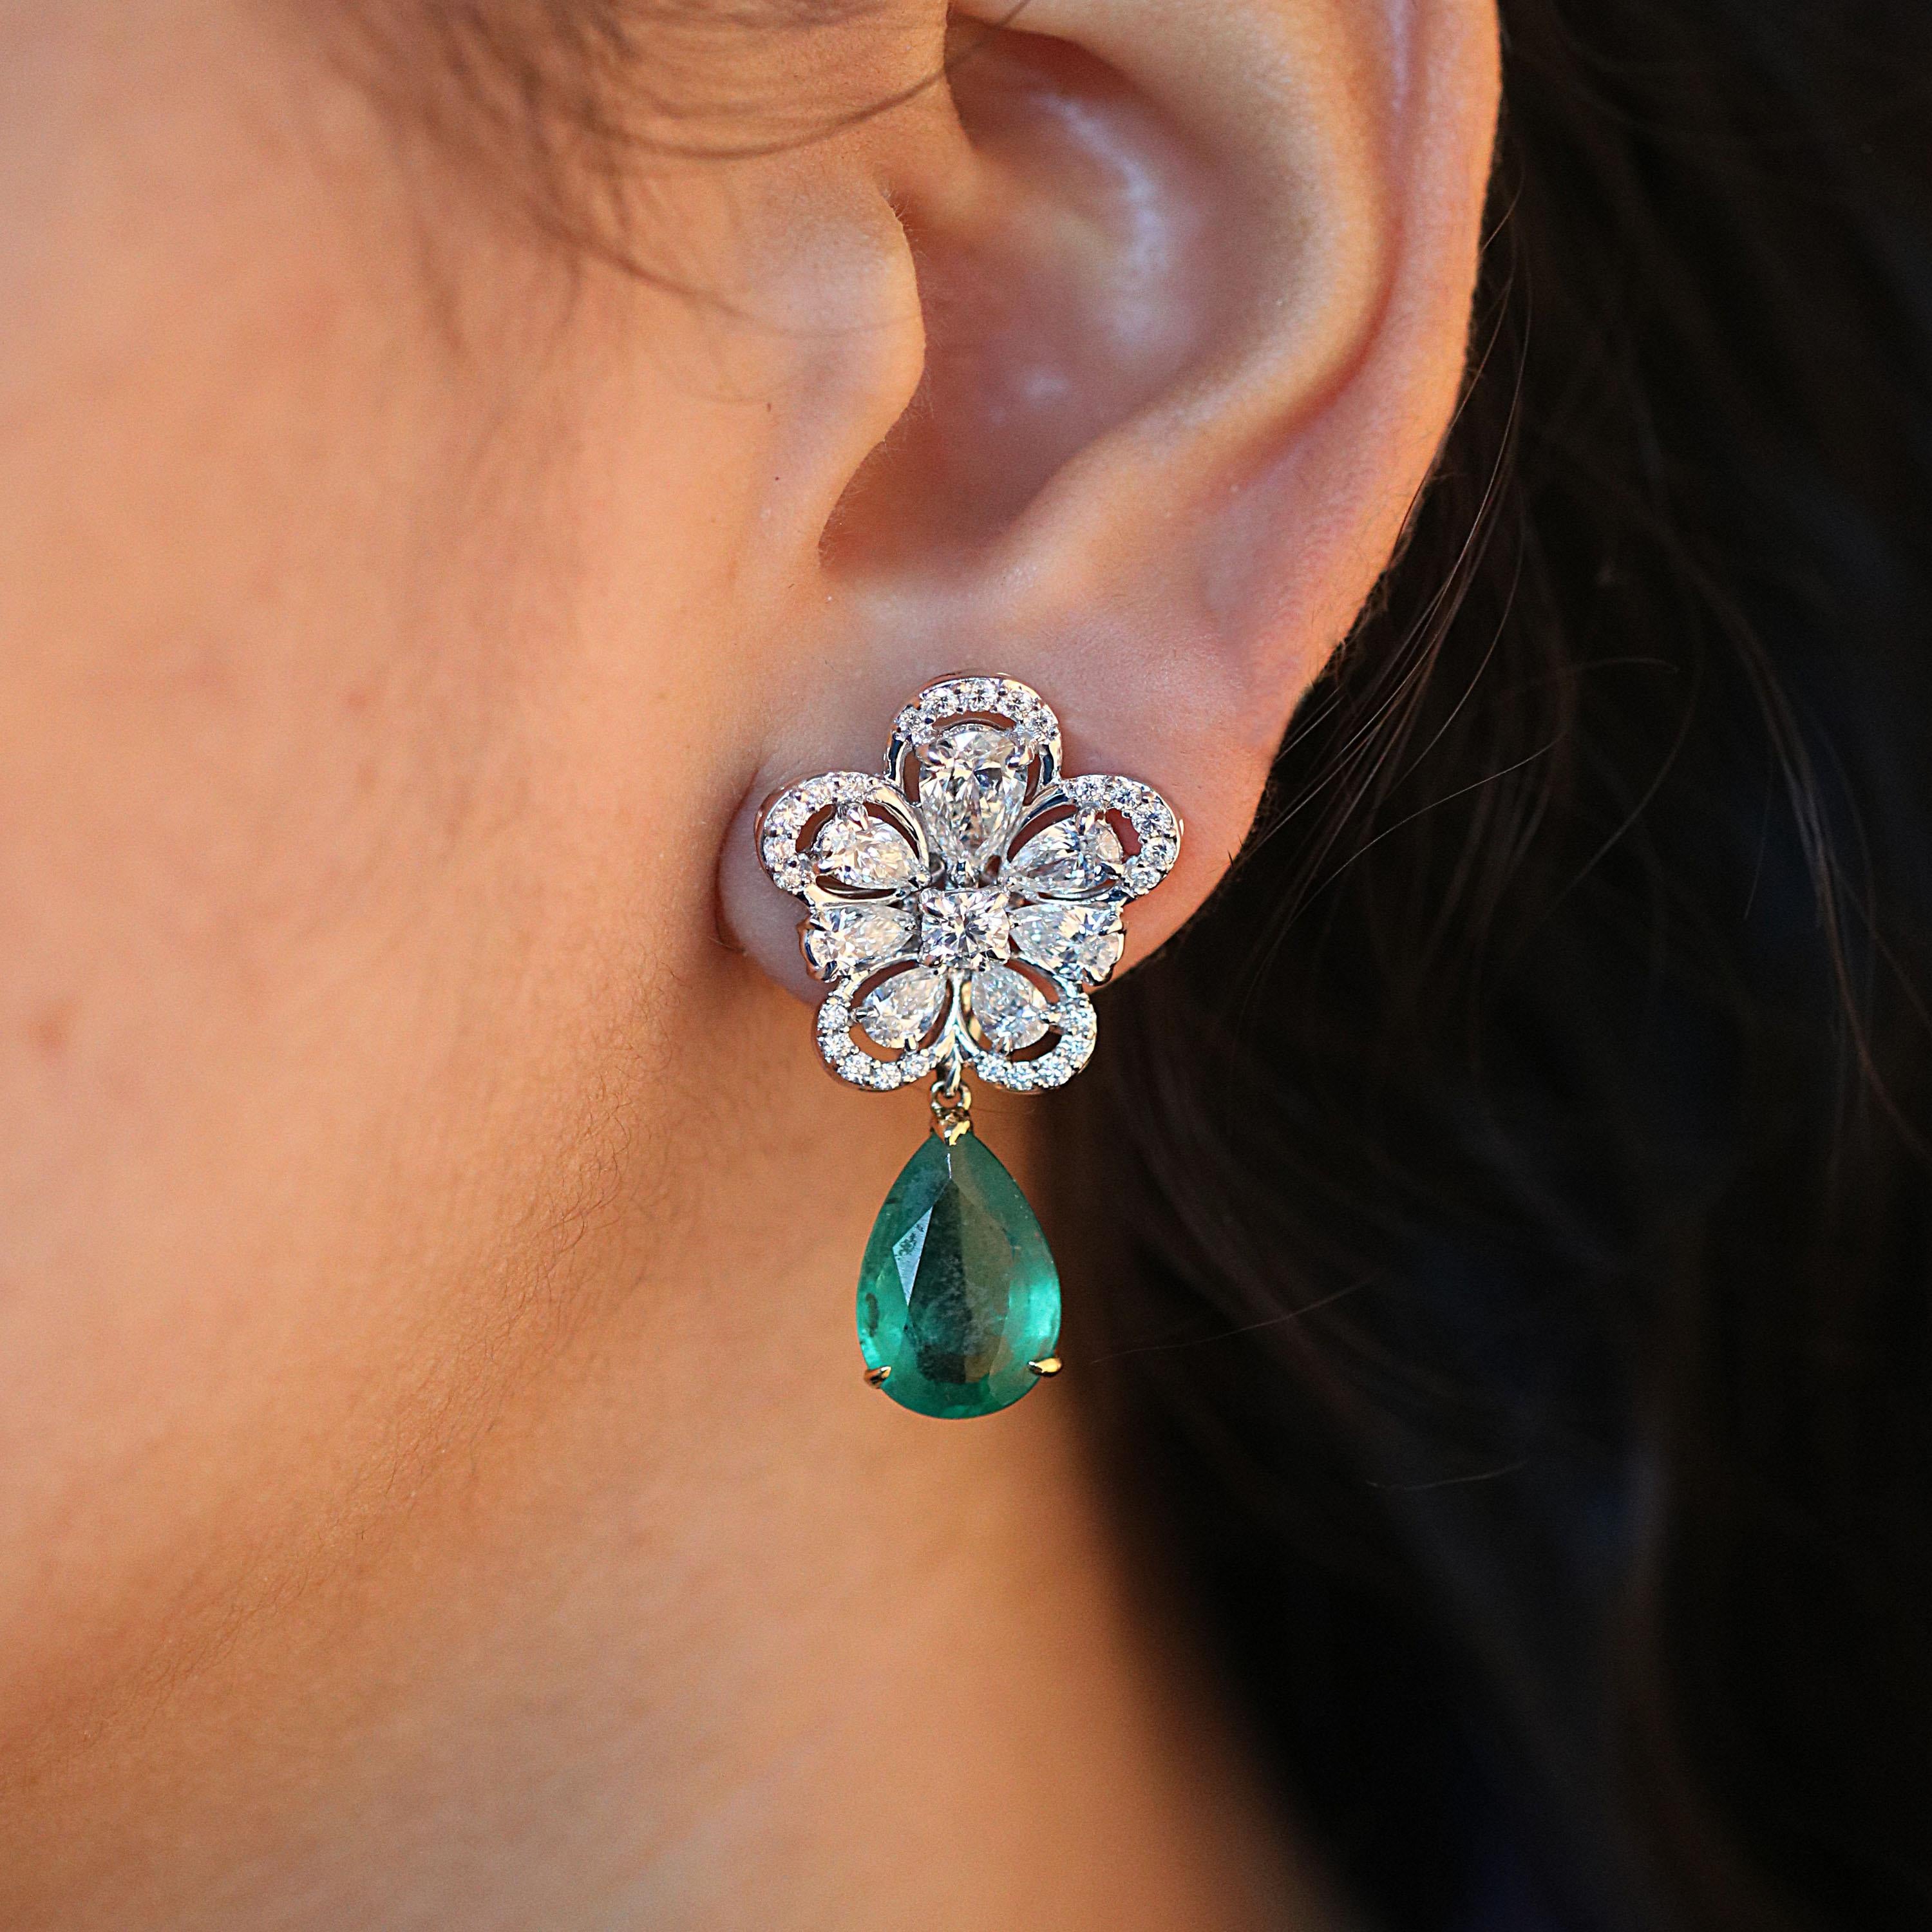 Gross Weight: 16.45 Grams
Diamond Weight: 3.92 cts
Emerald Weight: 5.69 cts
IGI Certification is done on request

Video of the product can be shared on request.

Each petal of the ornate flower is comprised of a pear shaped diamond, framed by round